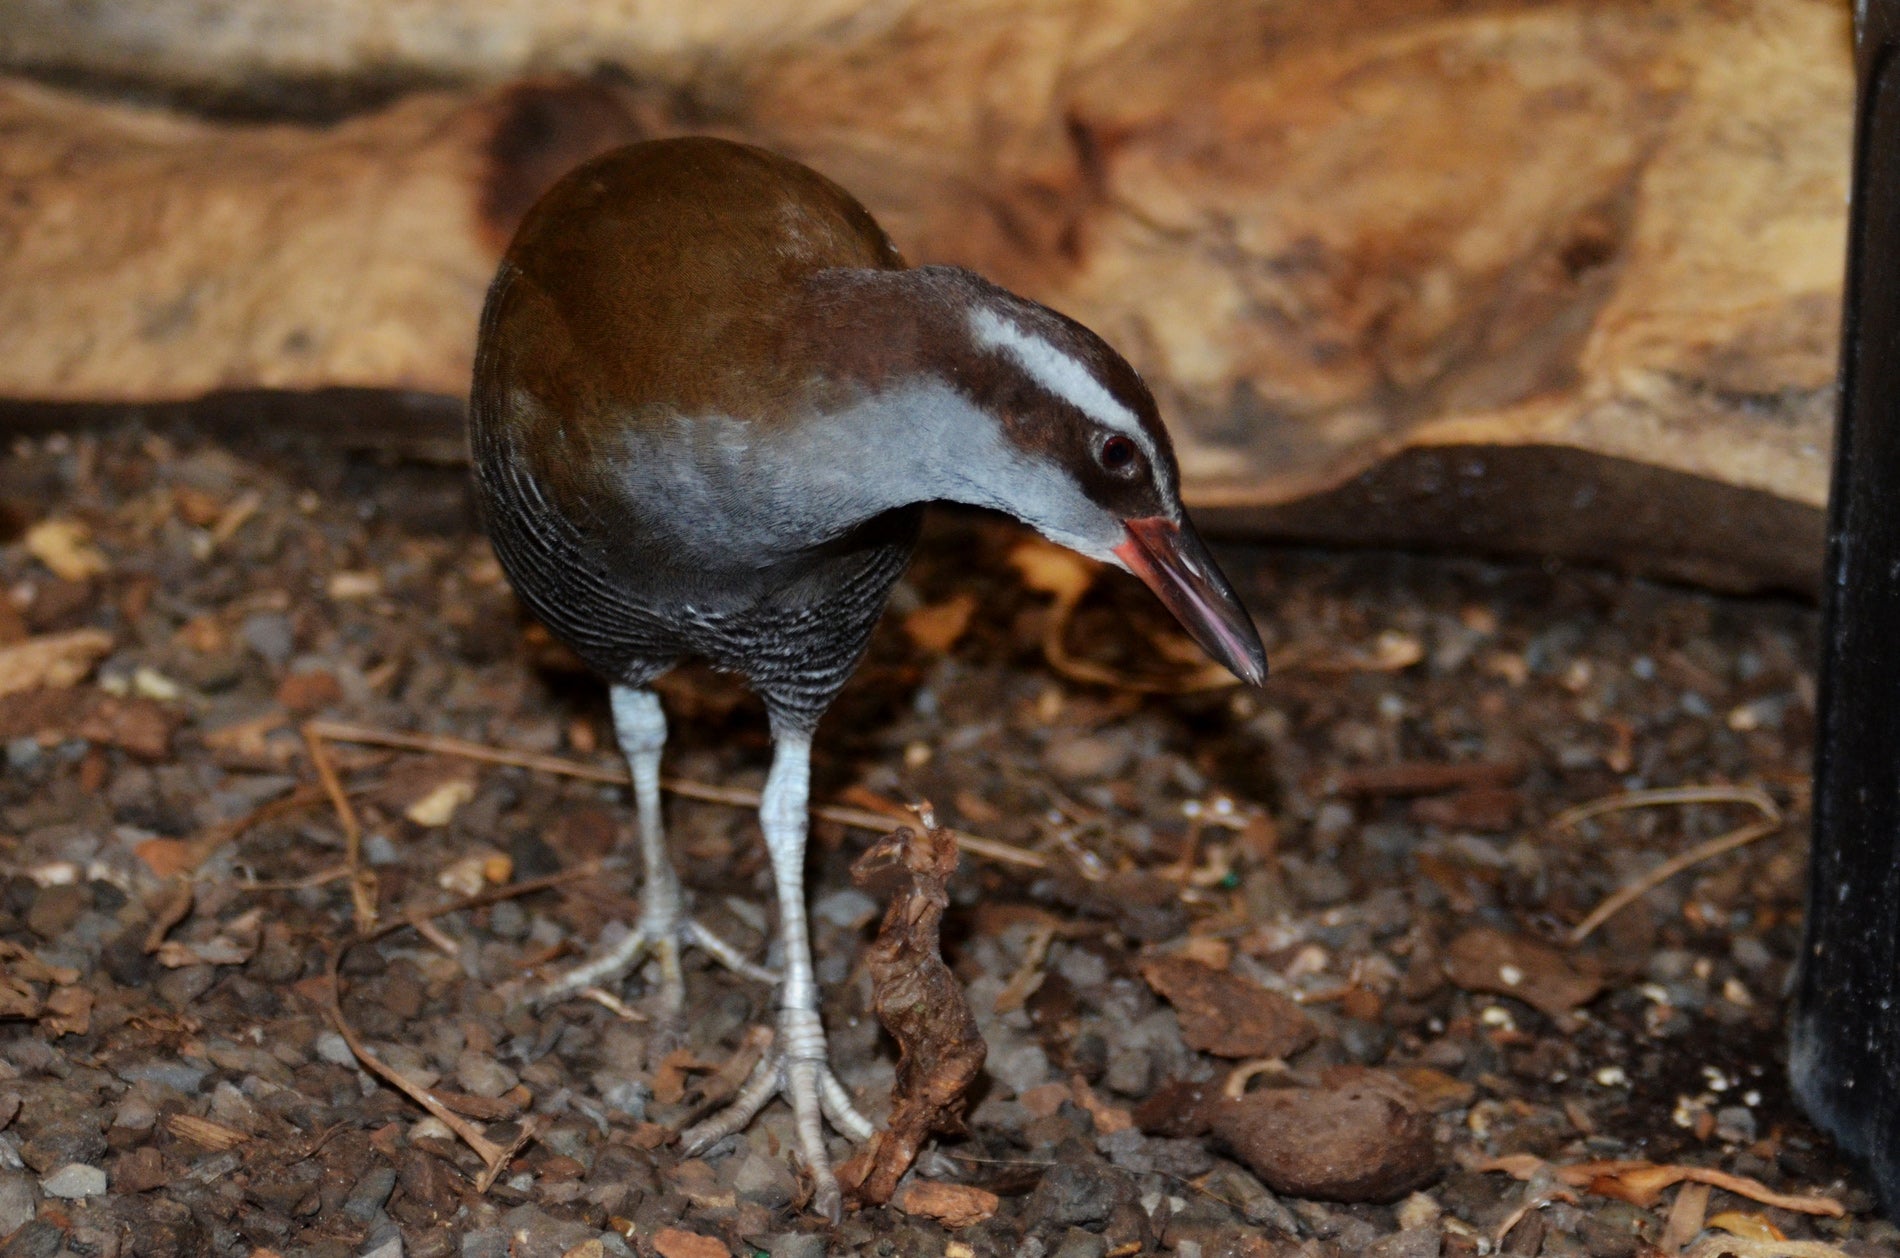 A small, flightless bird called a Guam rail with long legs and toes, and brown and silver fur walks through a mulchy habitat at the Smithsonian Conservation Biology Institute